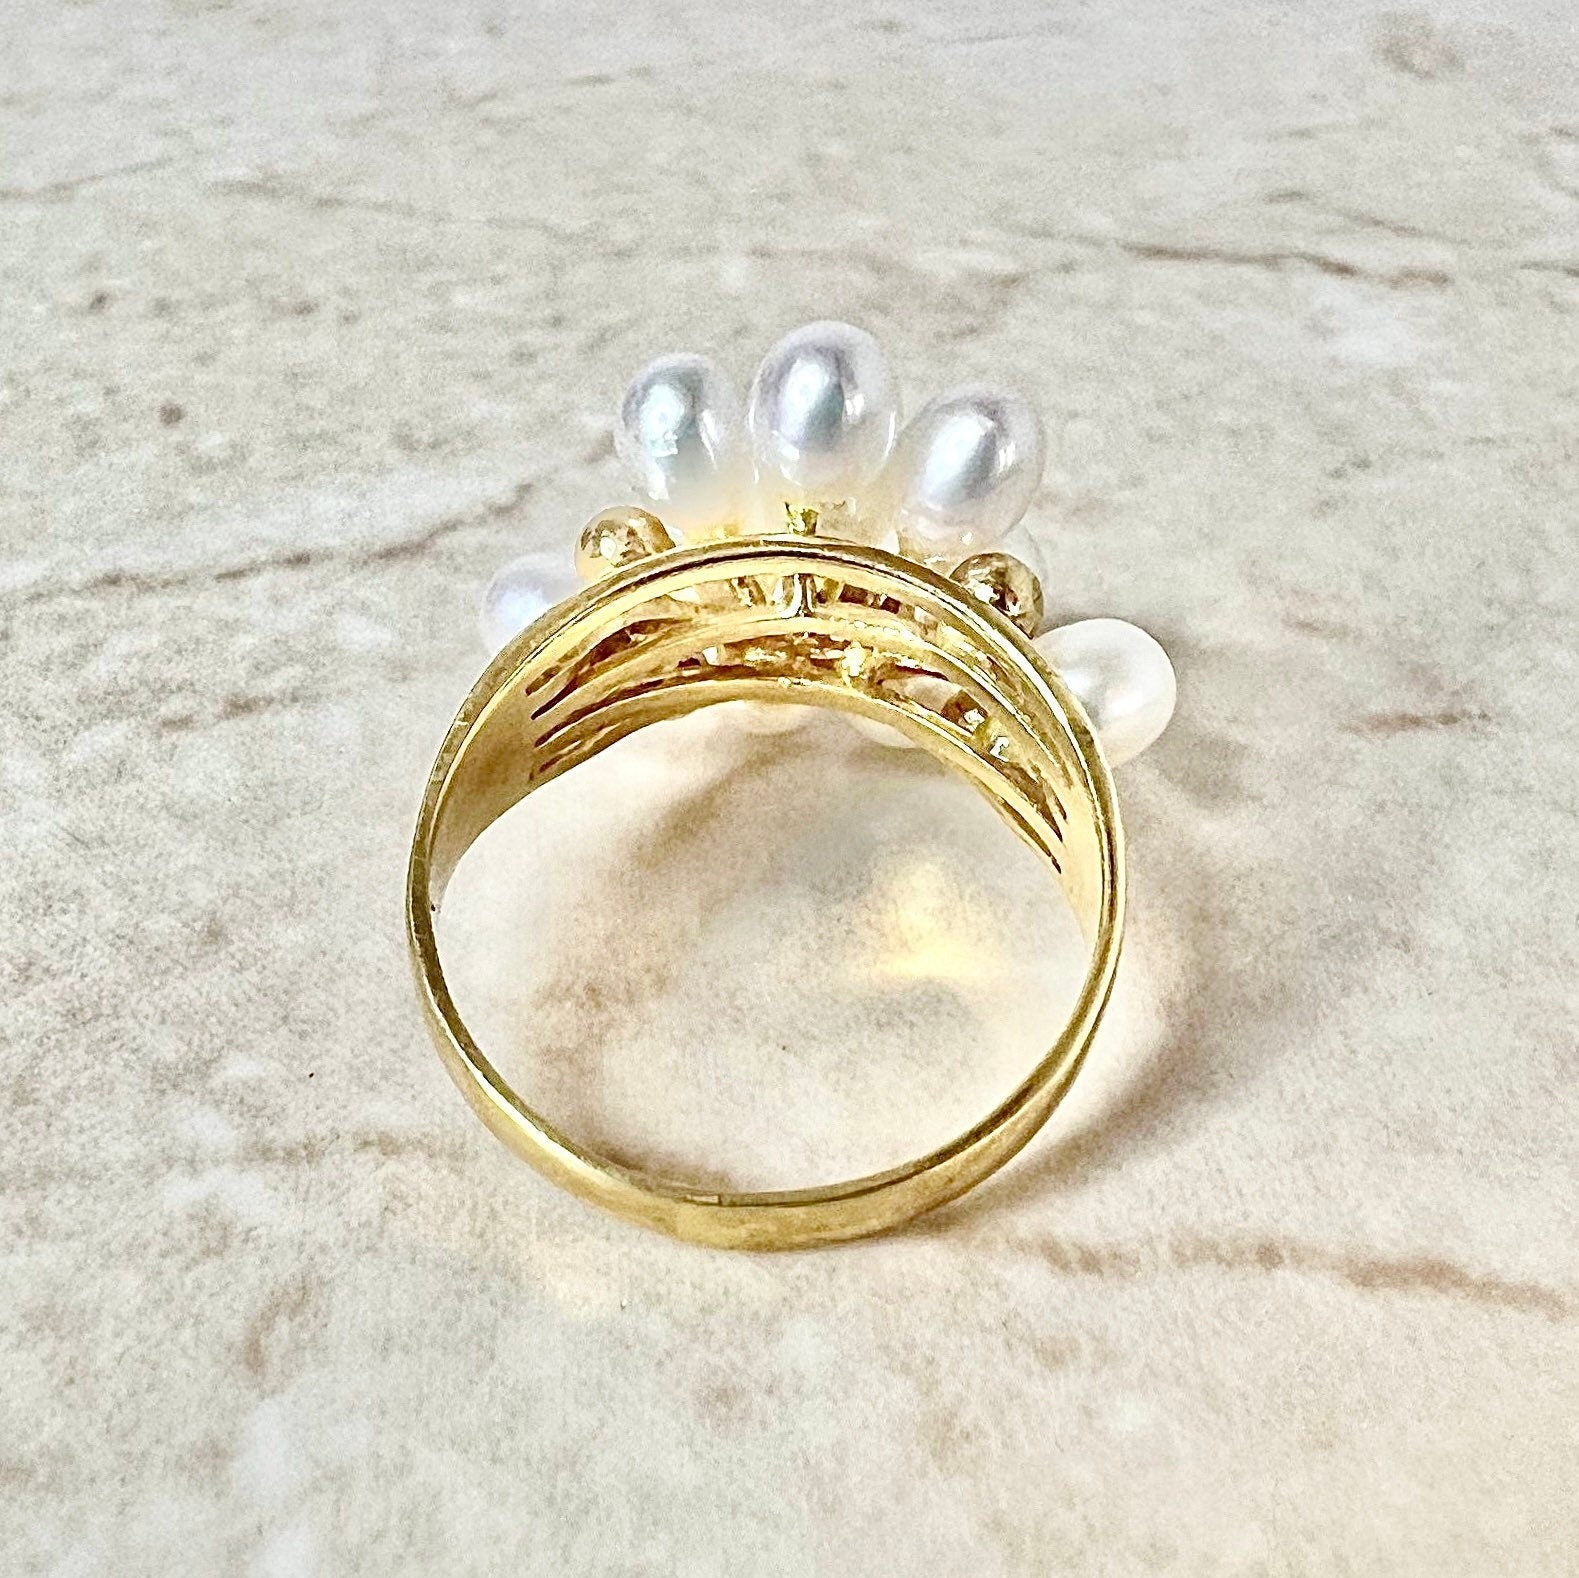 18K Vintage Pearl Ring - 18 Karat Yellow Gold Pearl Cocktail Ring - Gold Pearl Ring - Vintage Rings - Birthday Gift - Best Gifts For Her